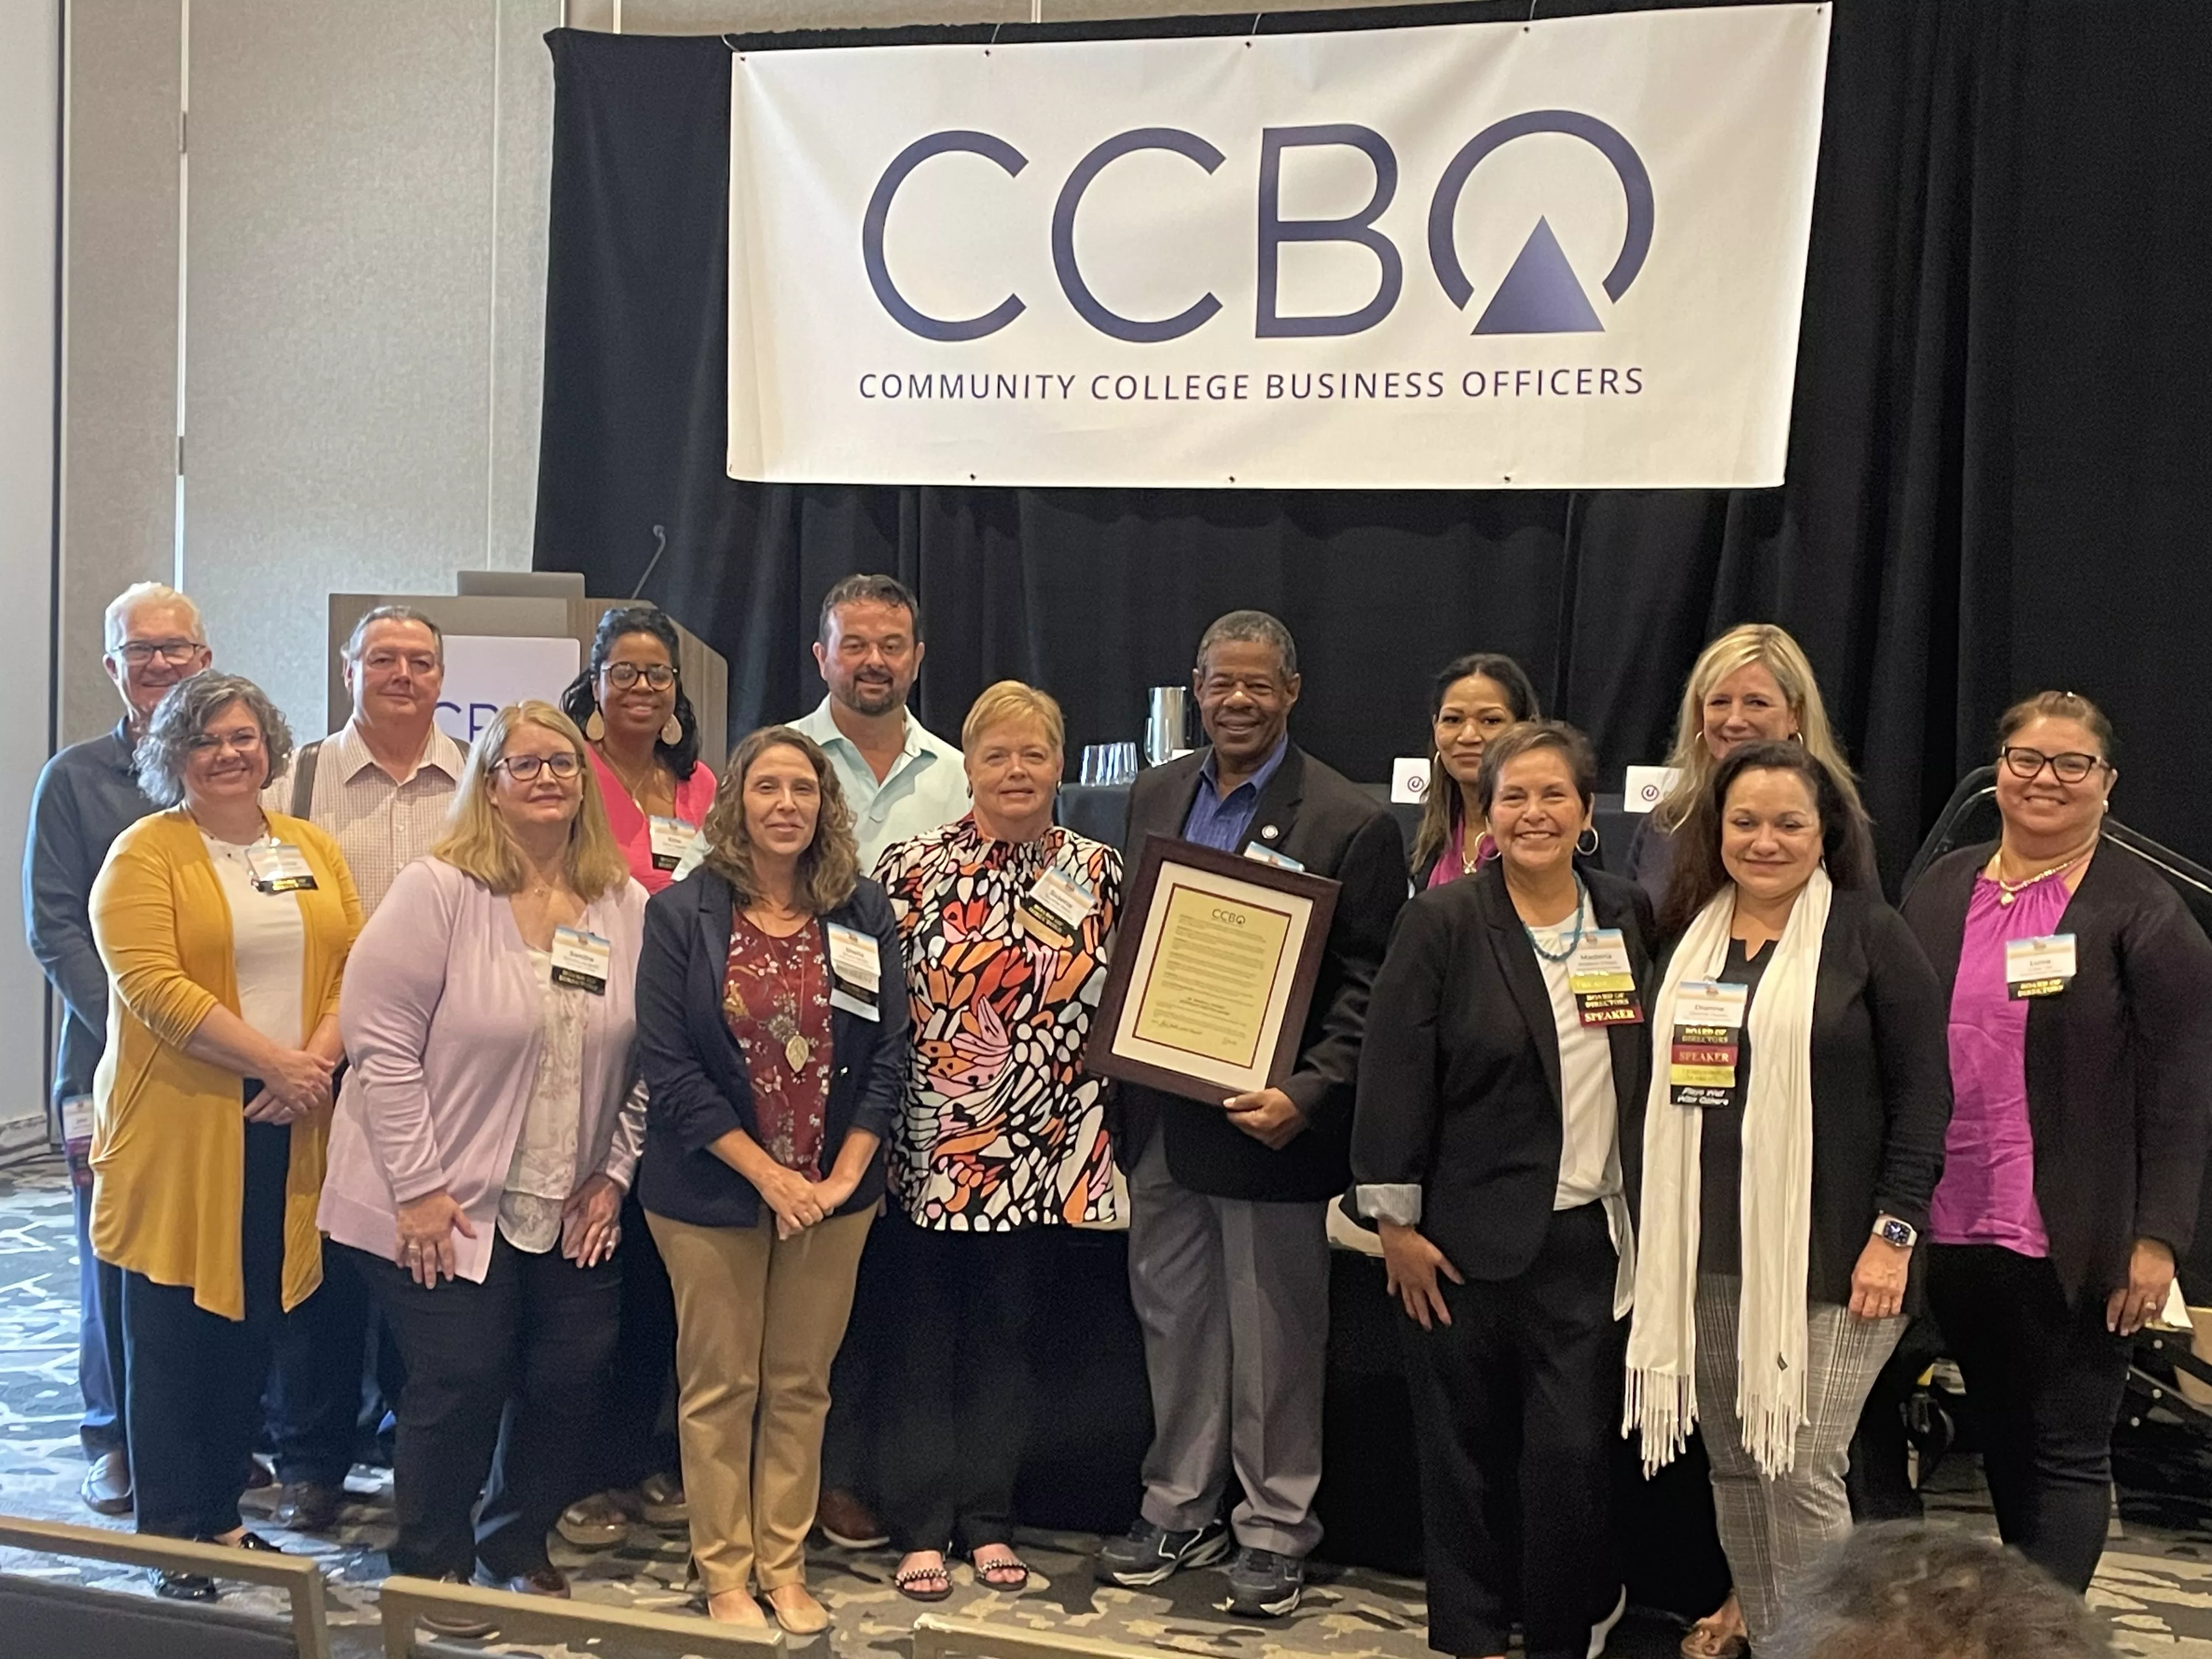 Dr. Ronald L. Rhames standing with The Community College Business Officers holding a certificate.